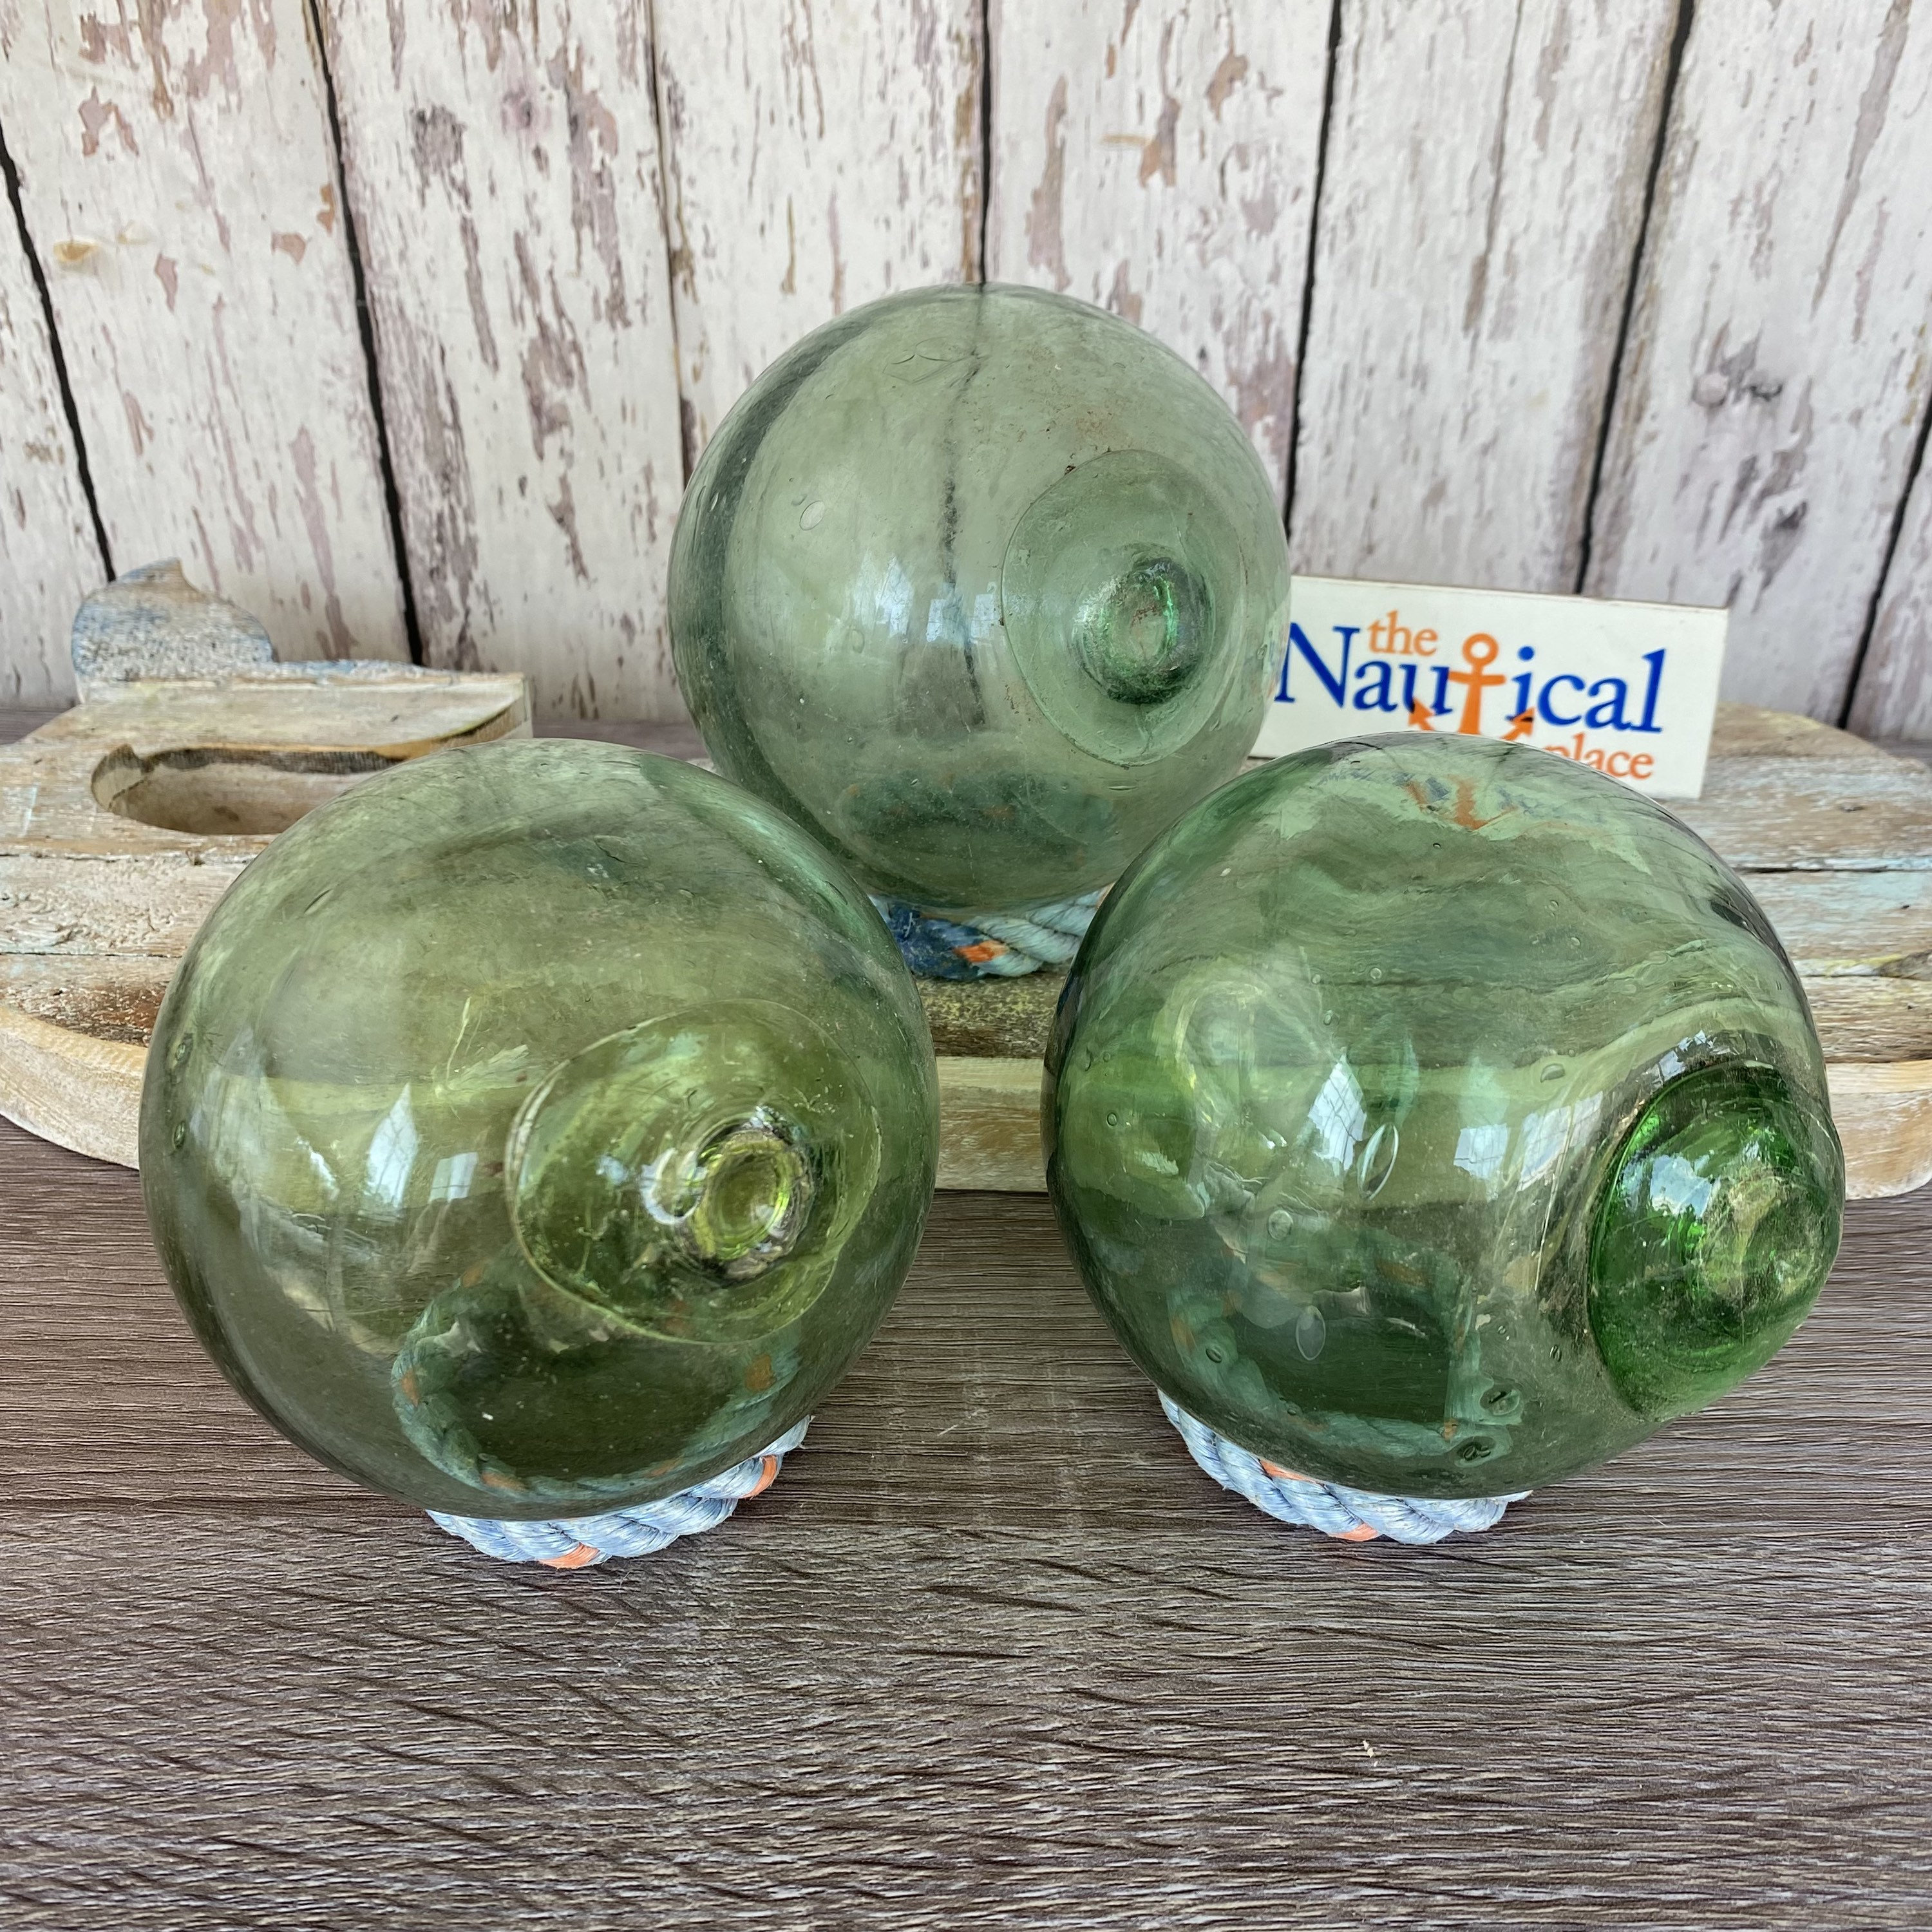 Japanese Glass Fishing Floats, 4 Softball Size, Authentic Glass Buoy From  Japan, Once Used by Fisherman on Nets Single or Set of 3 -  Canada